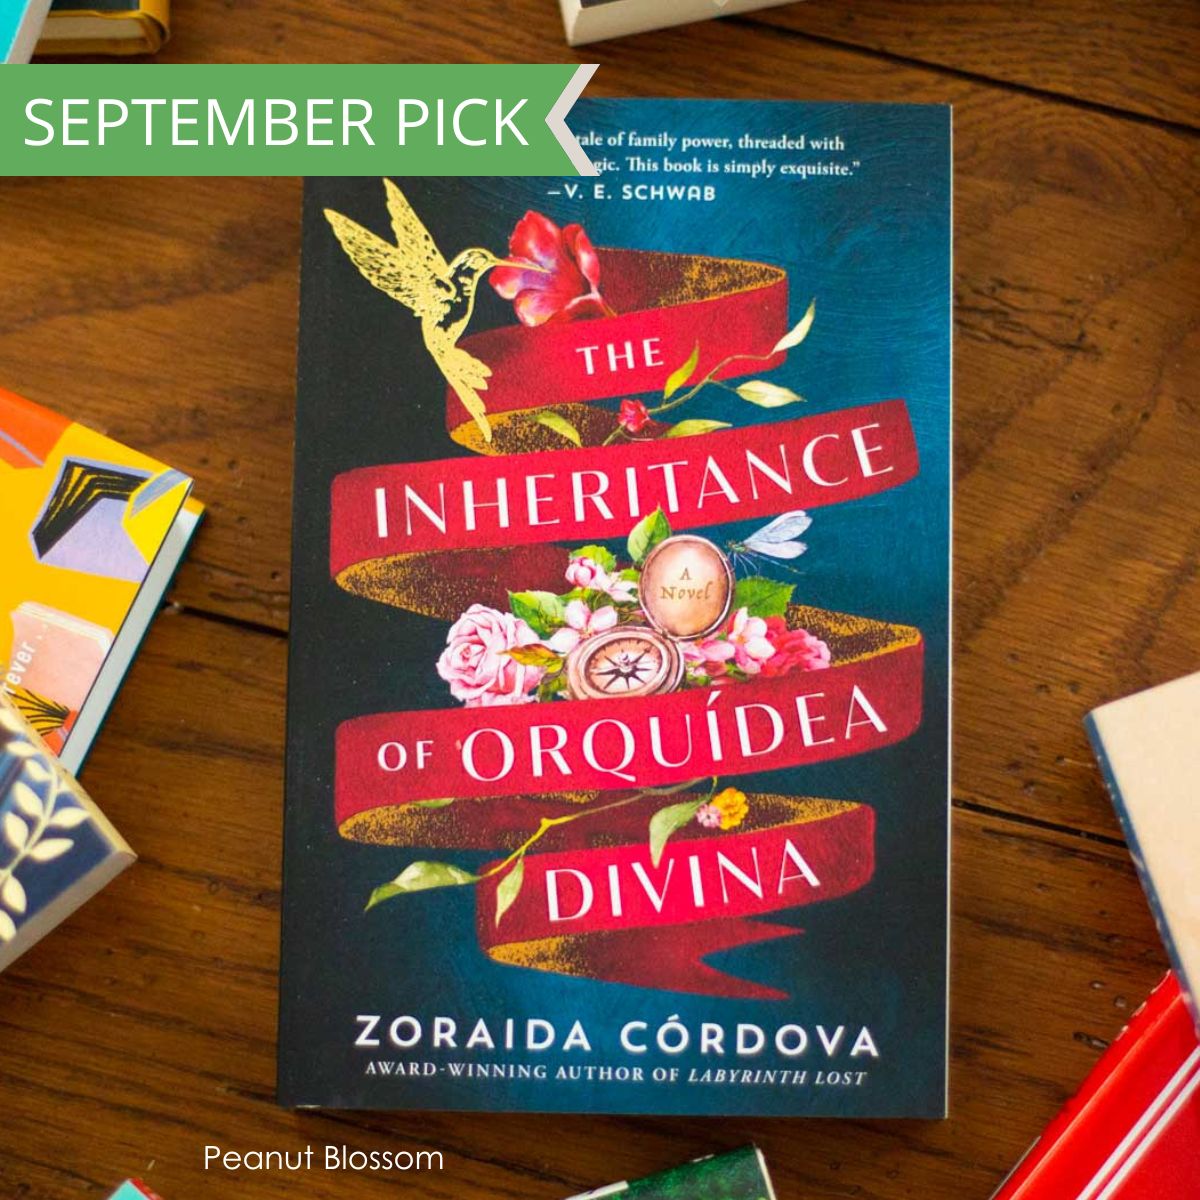 A copy of the book The Inheritance of Orquídea Divina sits on the table.